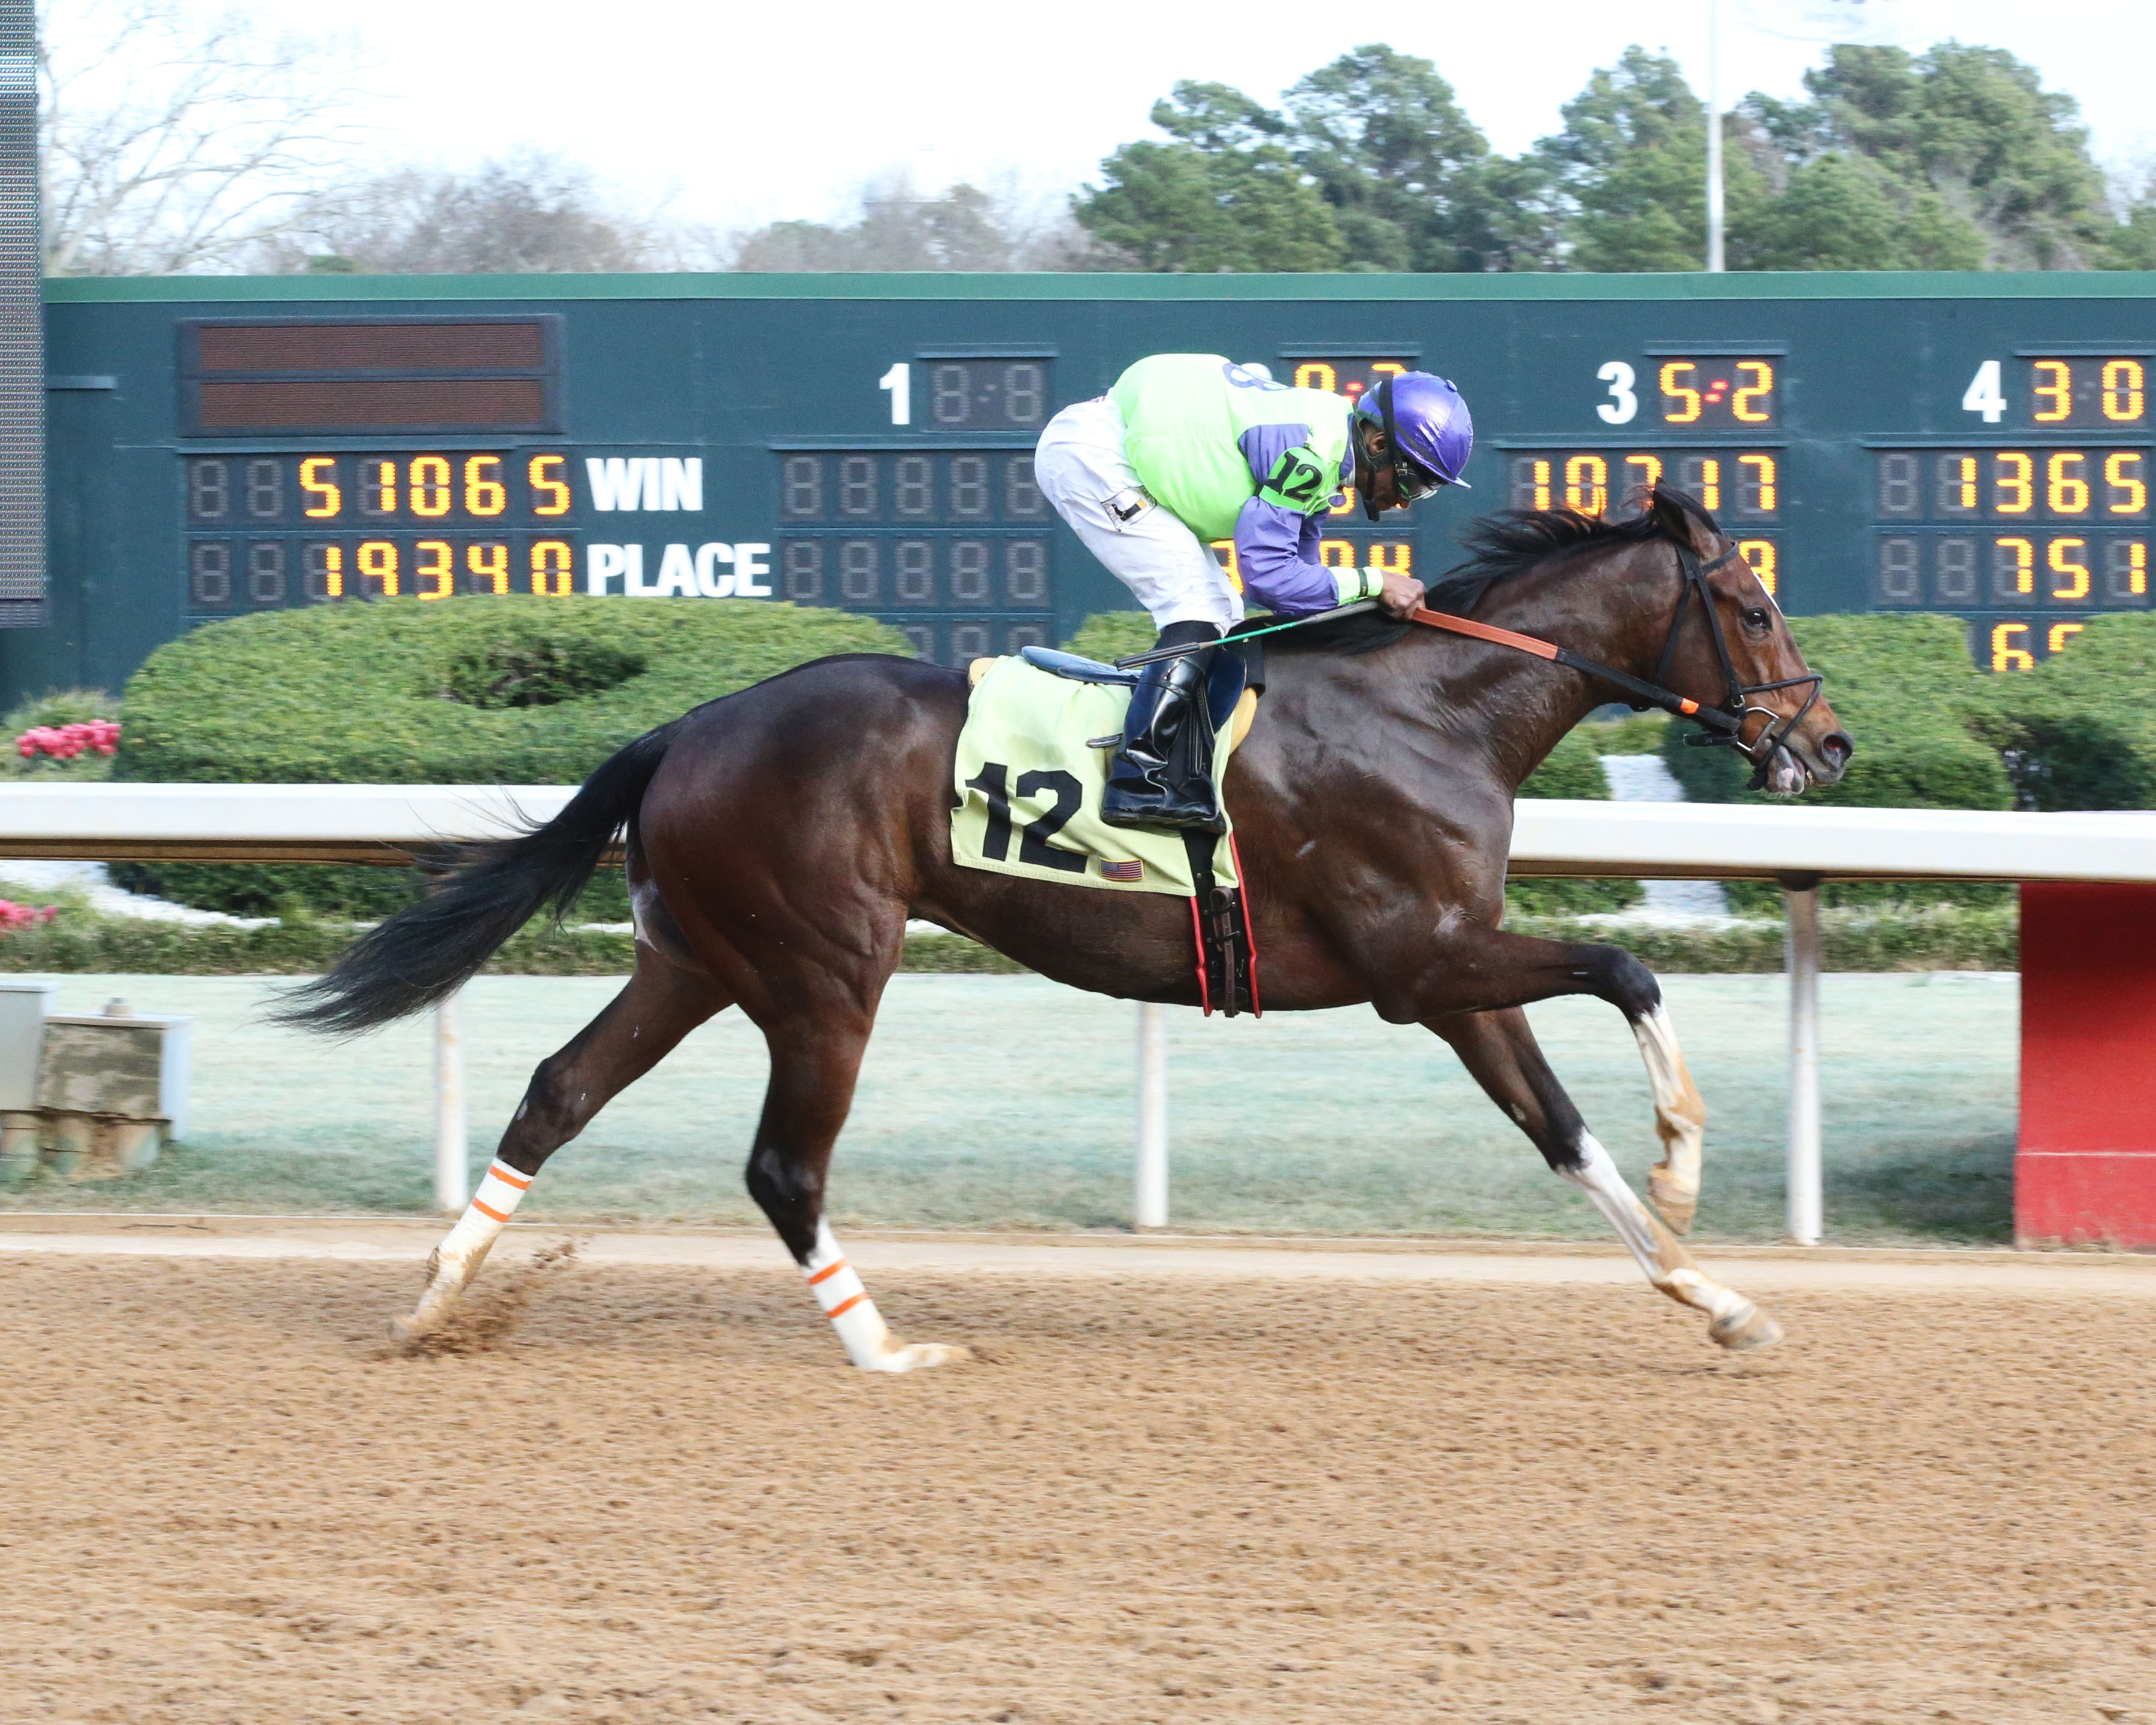 Kody With a K pushed his bankroll over the $100,000 mark with a victory at Oaklawn Feb. 12. Photo courtesy of Coady Photography.